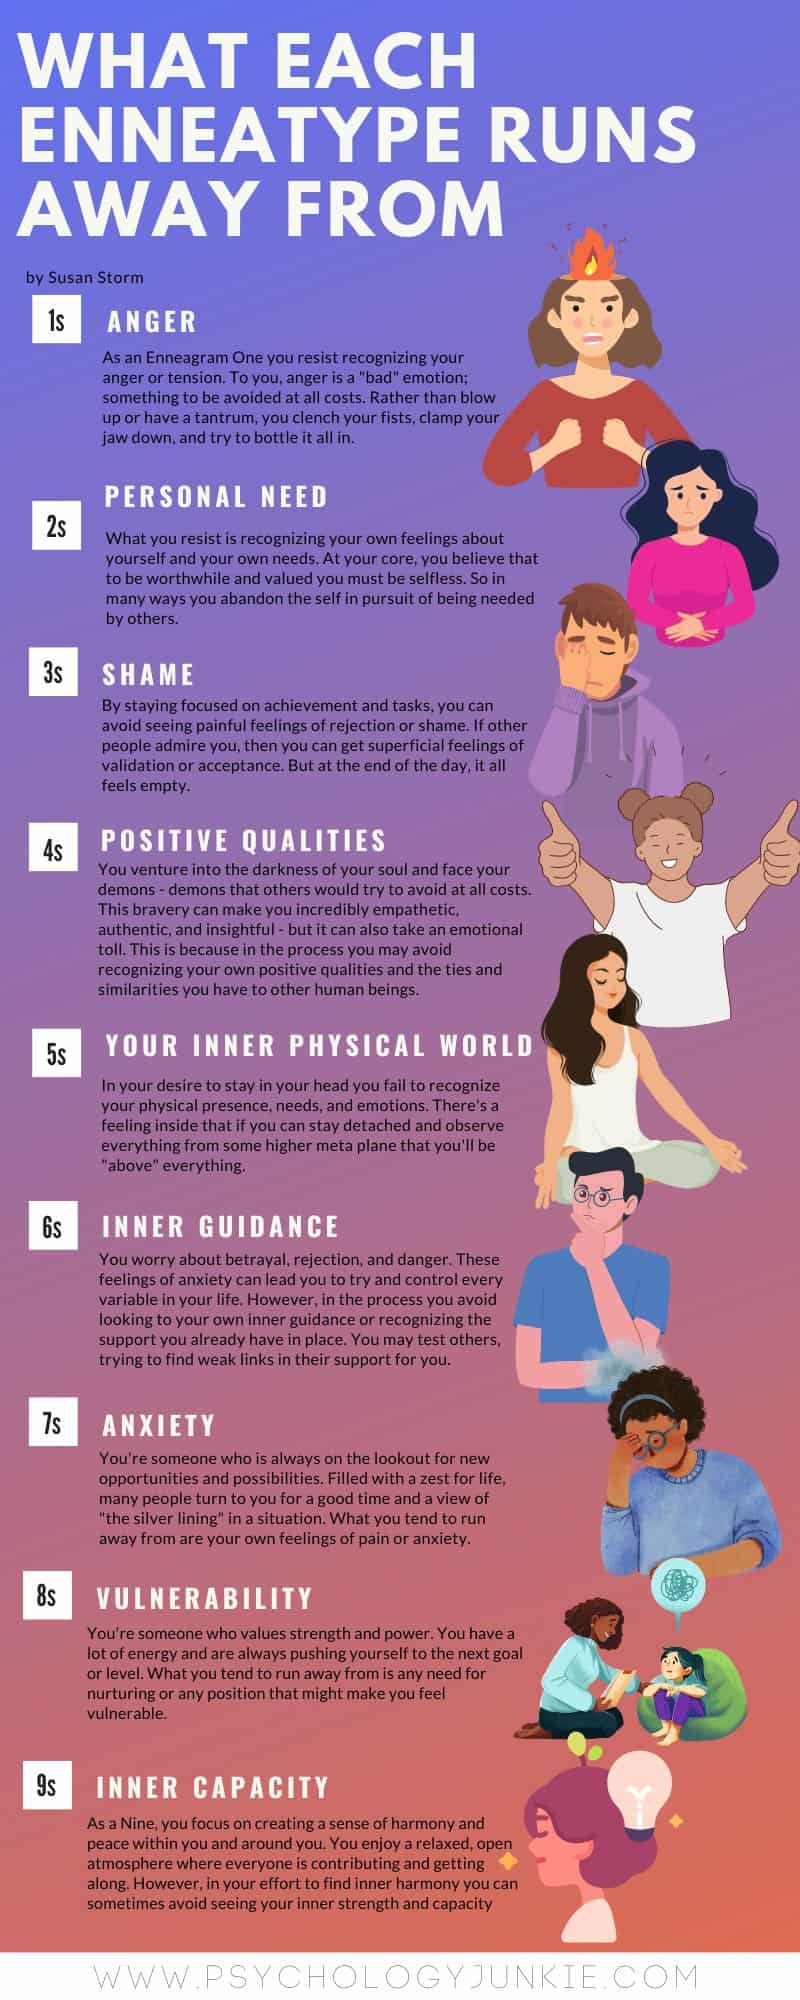 Find out what emotions or thoughts each Enneagram type runs away from. #Enneagram #Personality